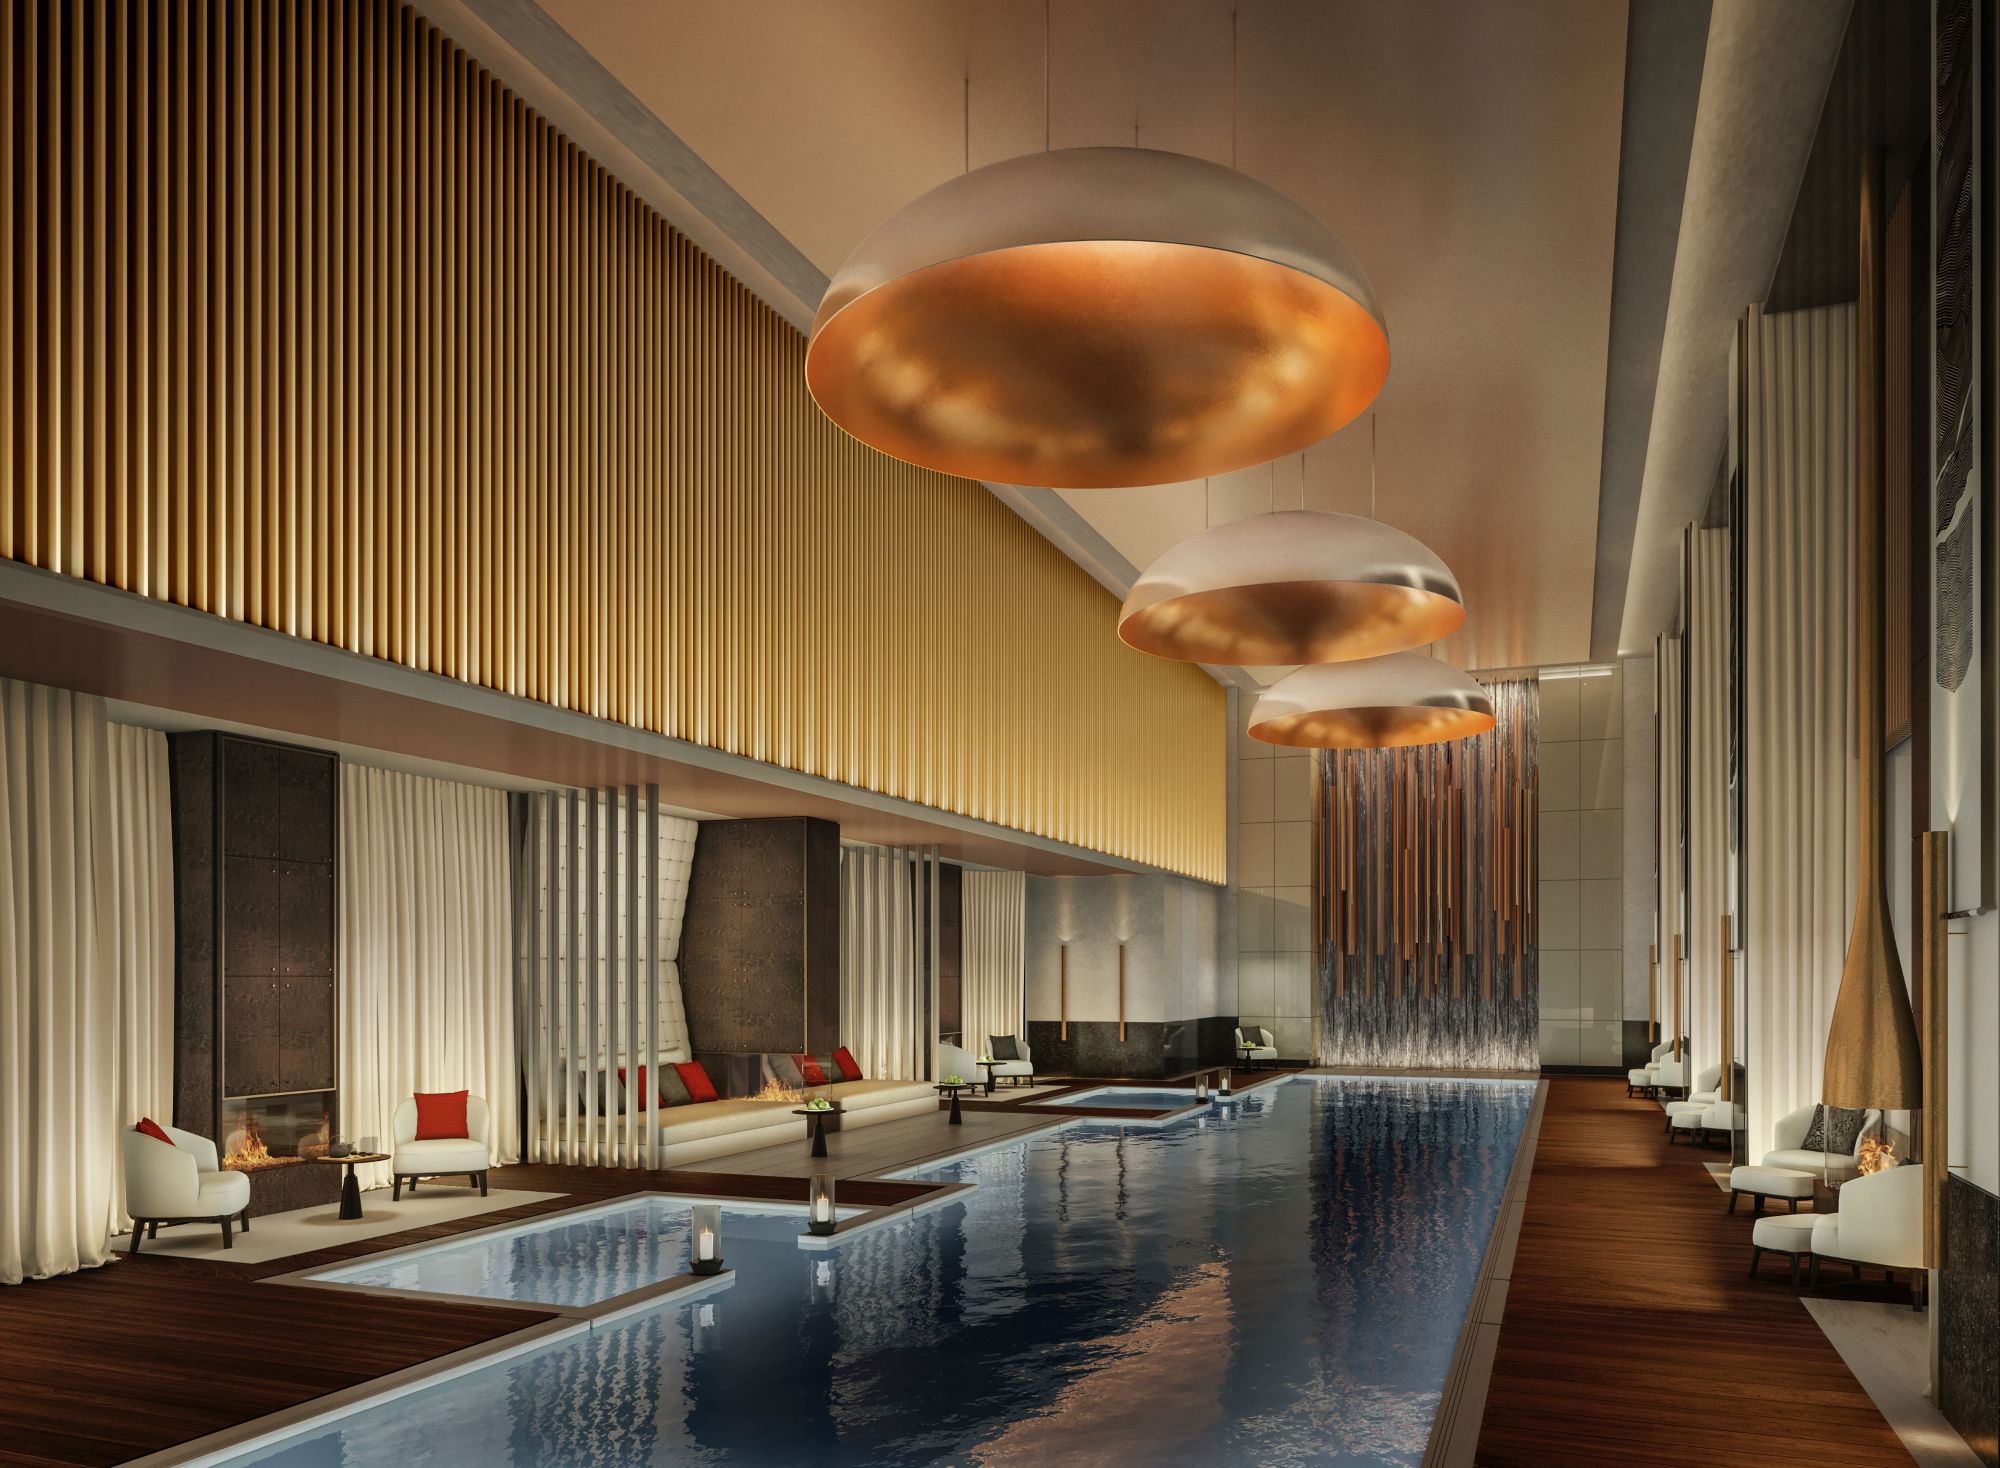 Will Aman New York be the city’s most luxurious hotel?